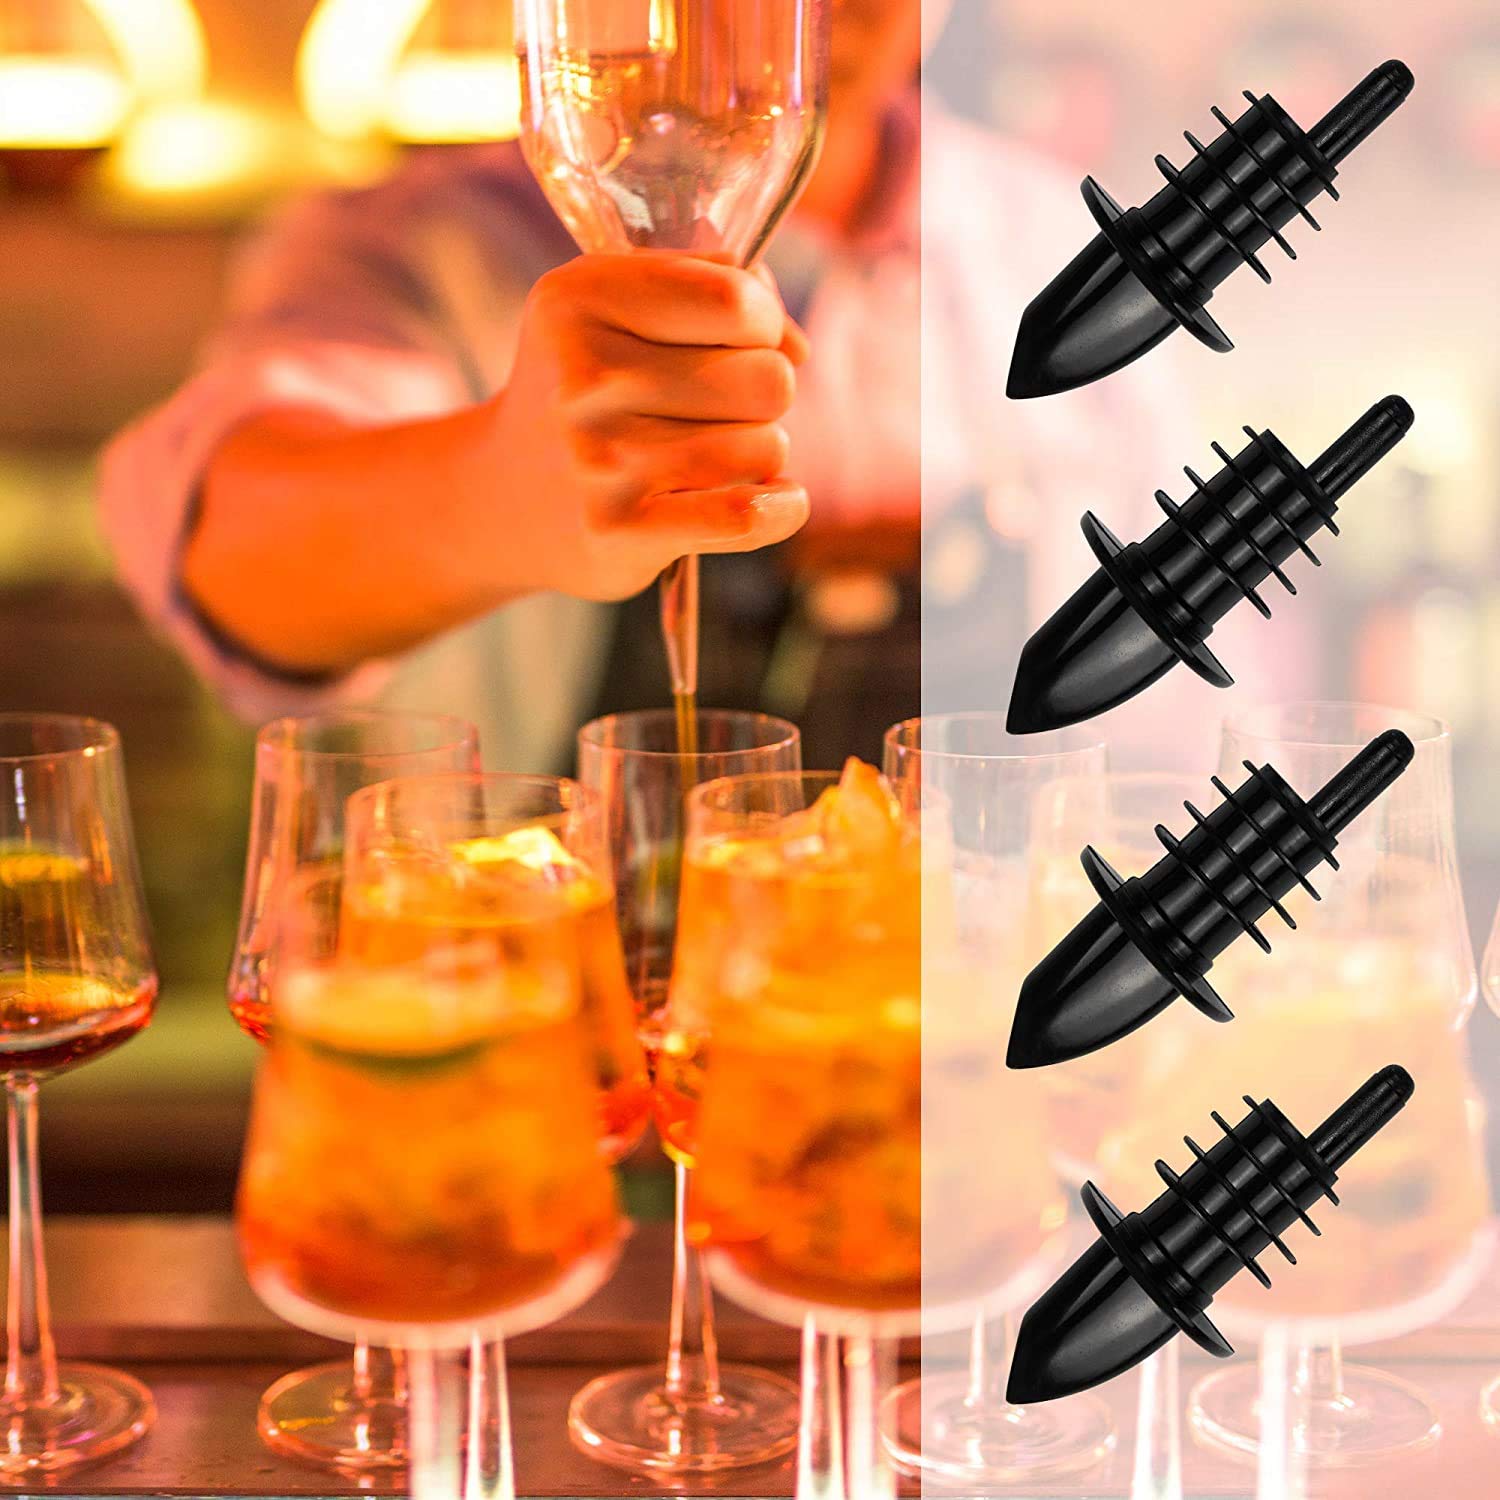 NJ Free-Flow Liquor Bottle Speed Pourers with Tapered Spout, Plastic Free Flow Liquor Bottle Pourer for Bar, Hotel, Restaurant and Home use : 10 Pcs Black